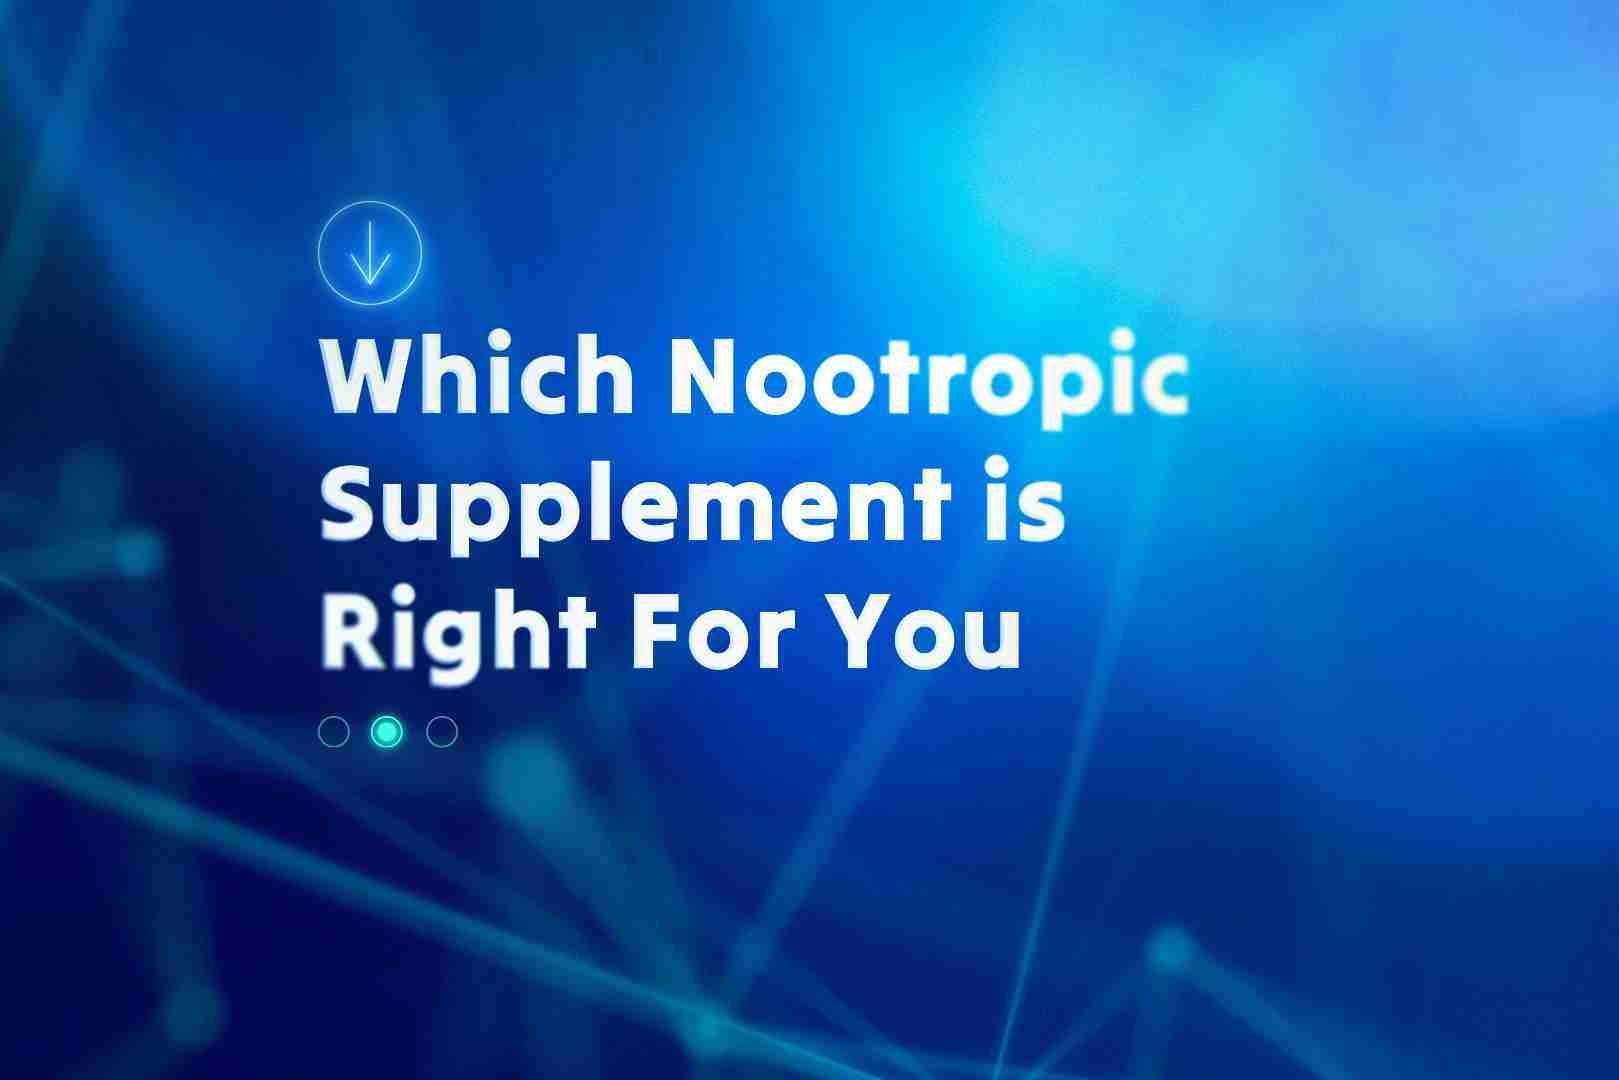 which nootropic supplement is right for you